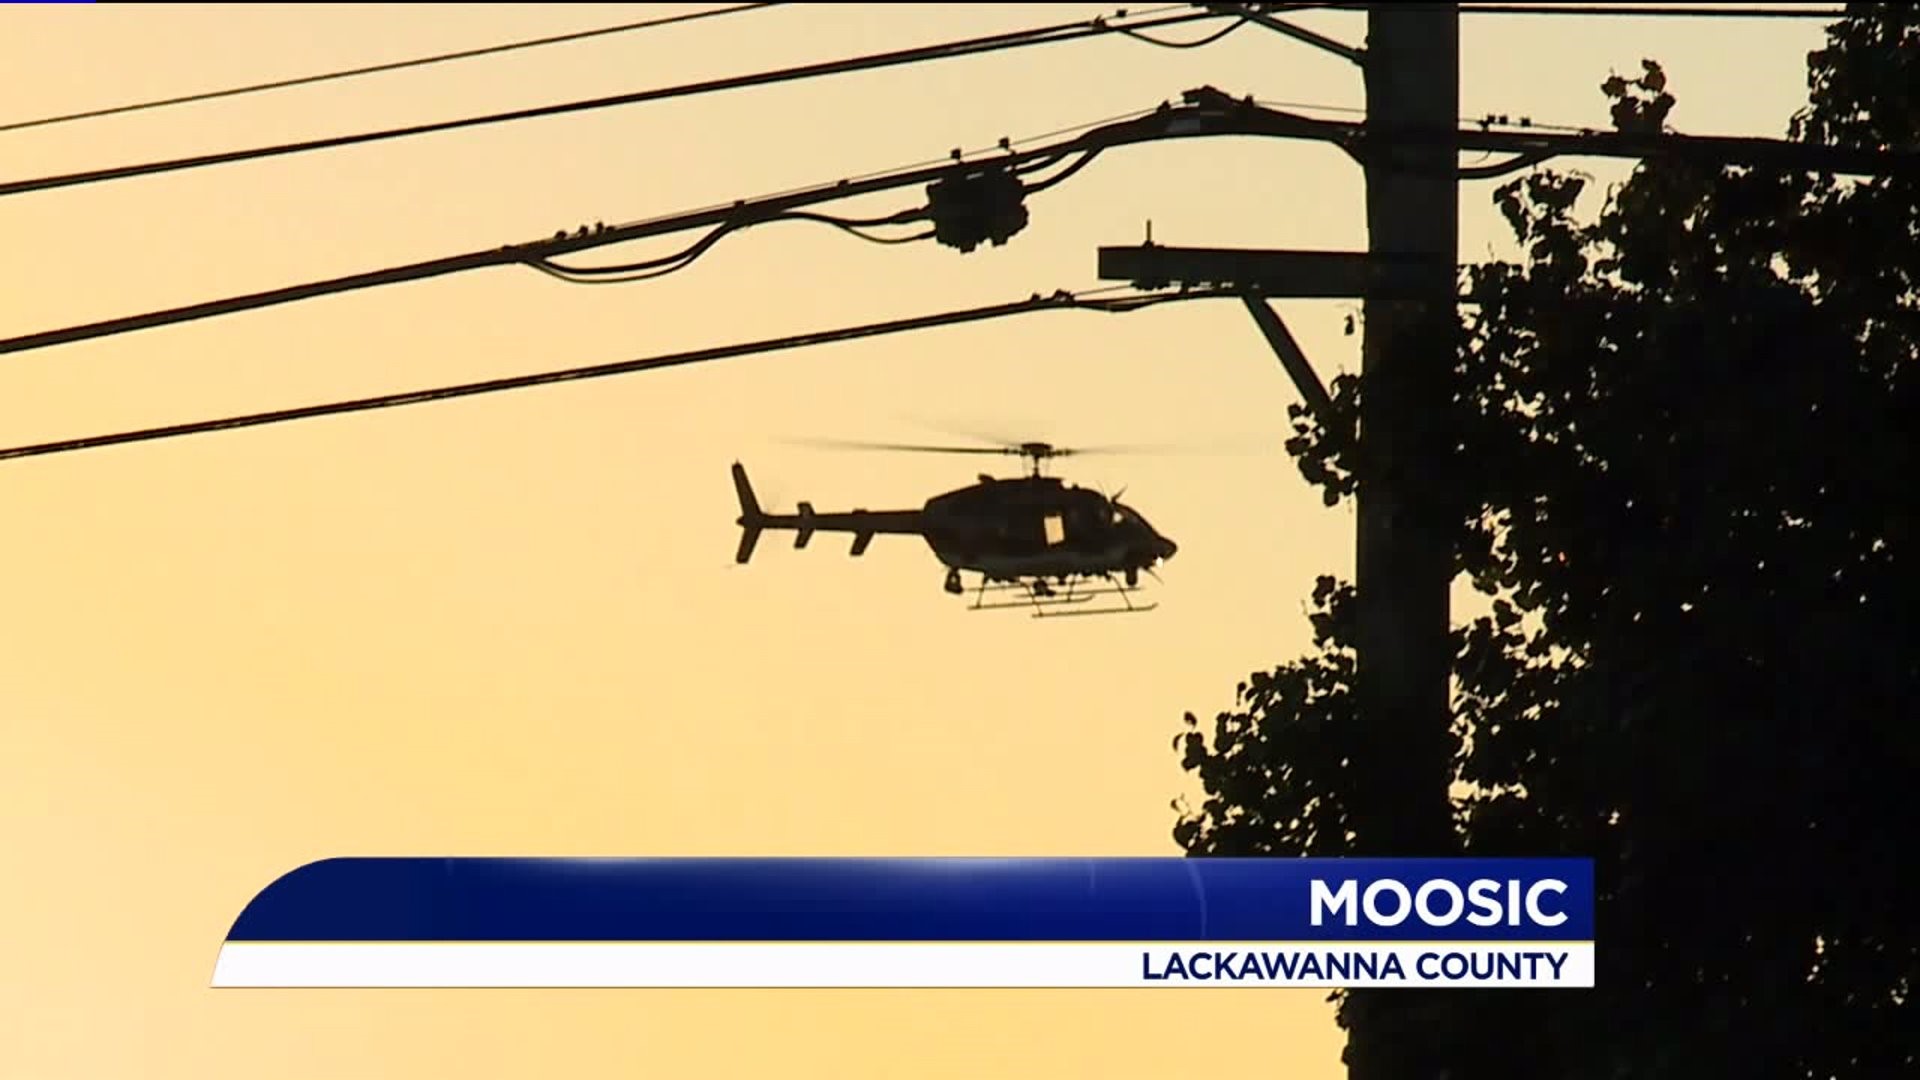 Heavy Police Presence During Search in Lackawanna County